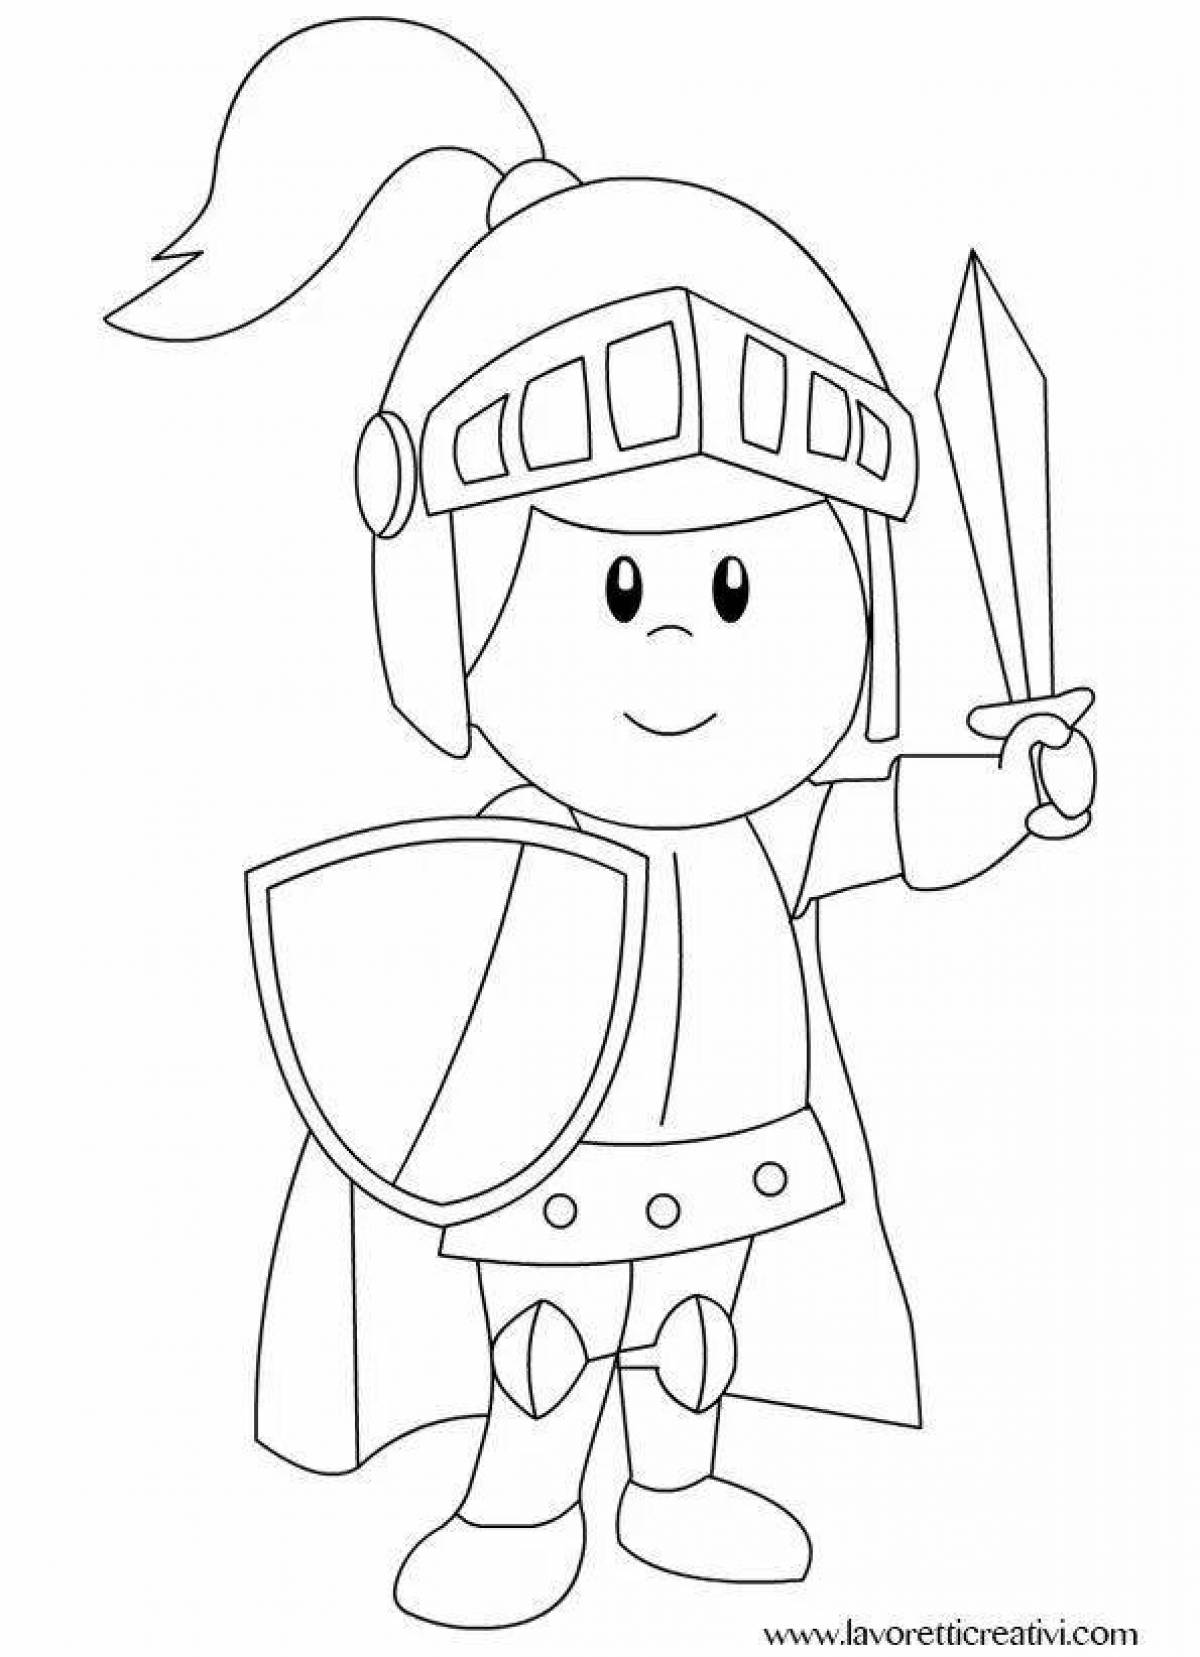 Noble knight coloring book for kids